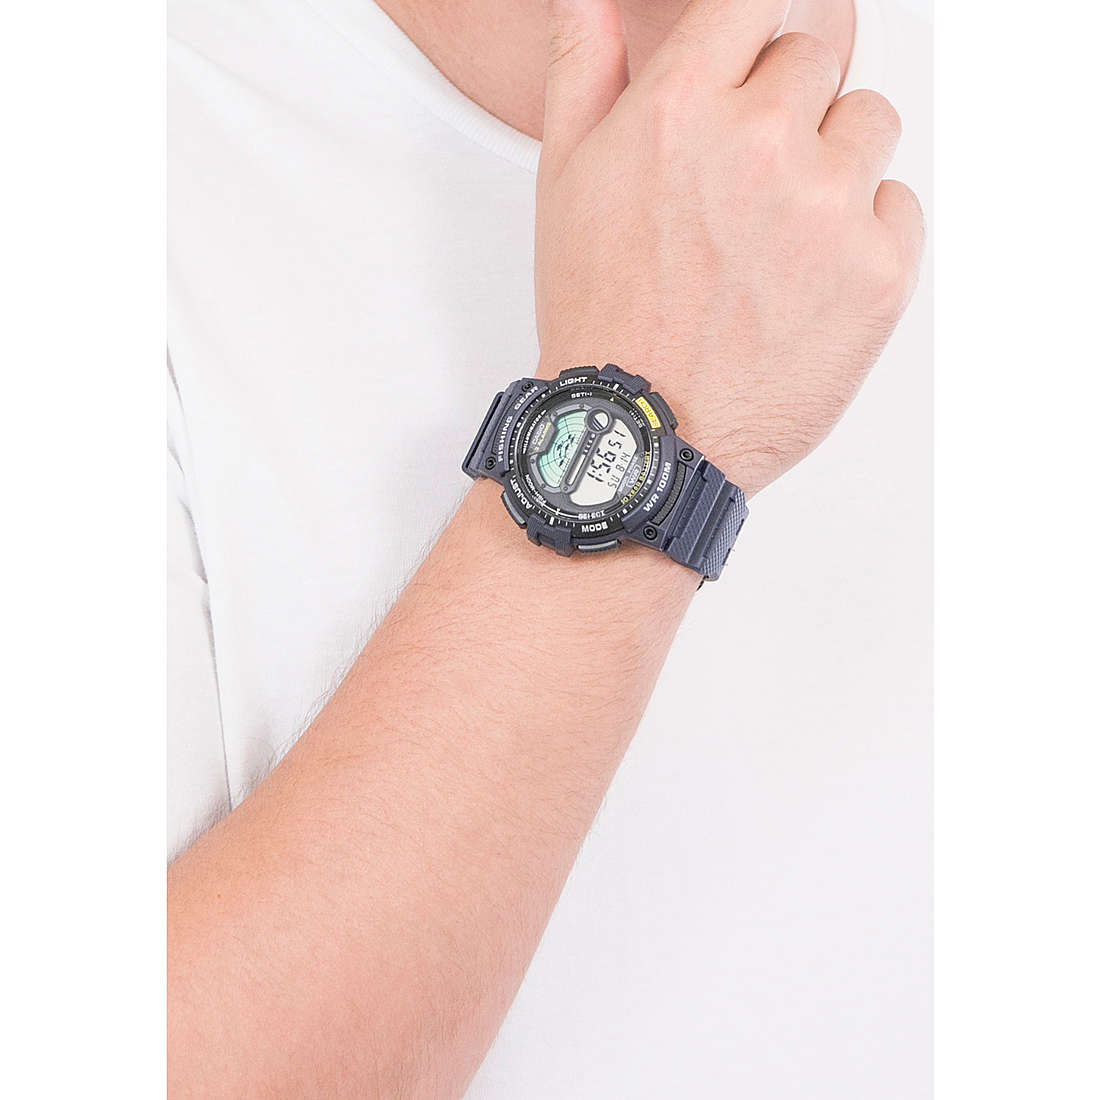 Casio multifunction Collection man WS-1200H-2AVEF wearing